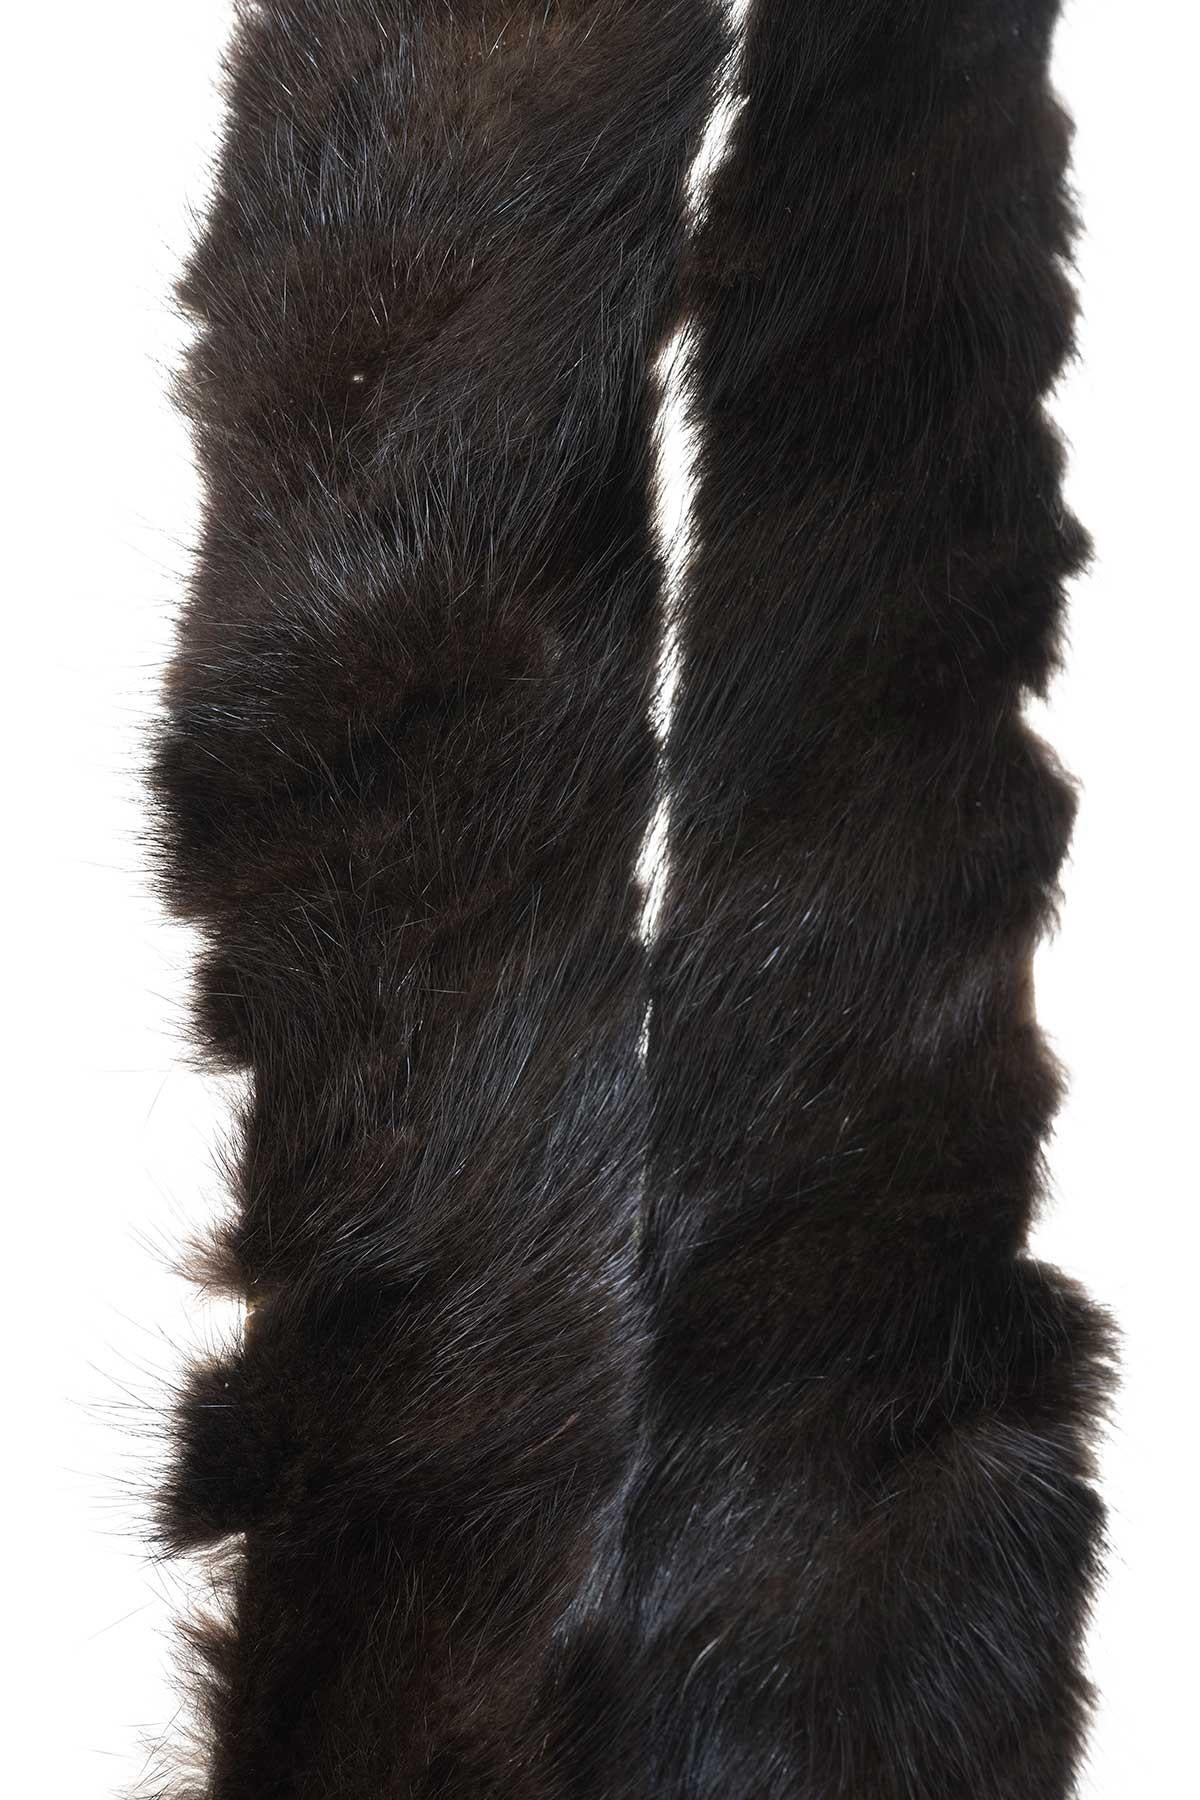 Fall Winter 2001 iconic and rare upcycled mink scarf by Maison Martin Margiela.
Original box.
The composition is 100% fur.